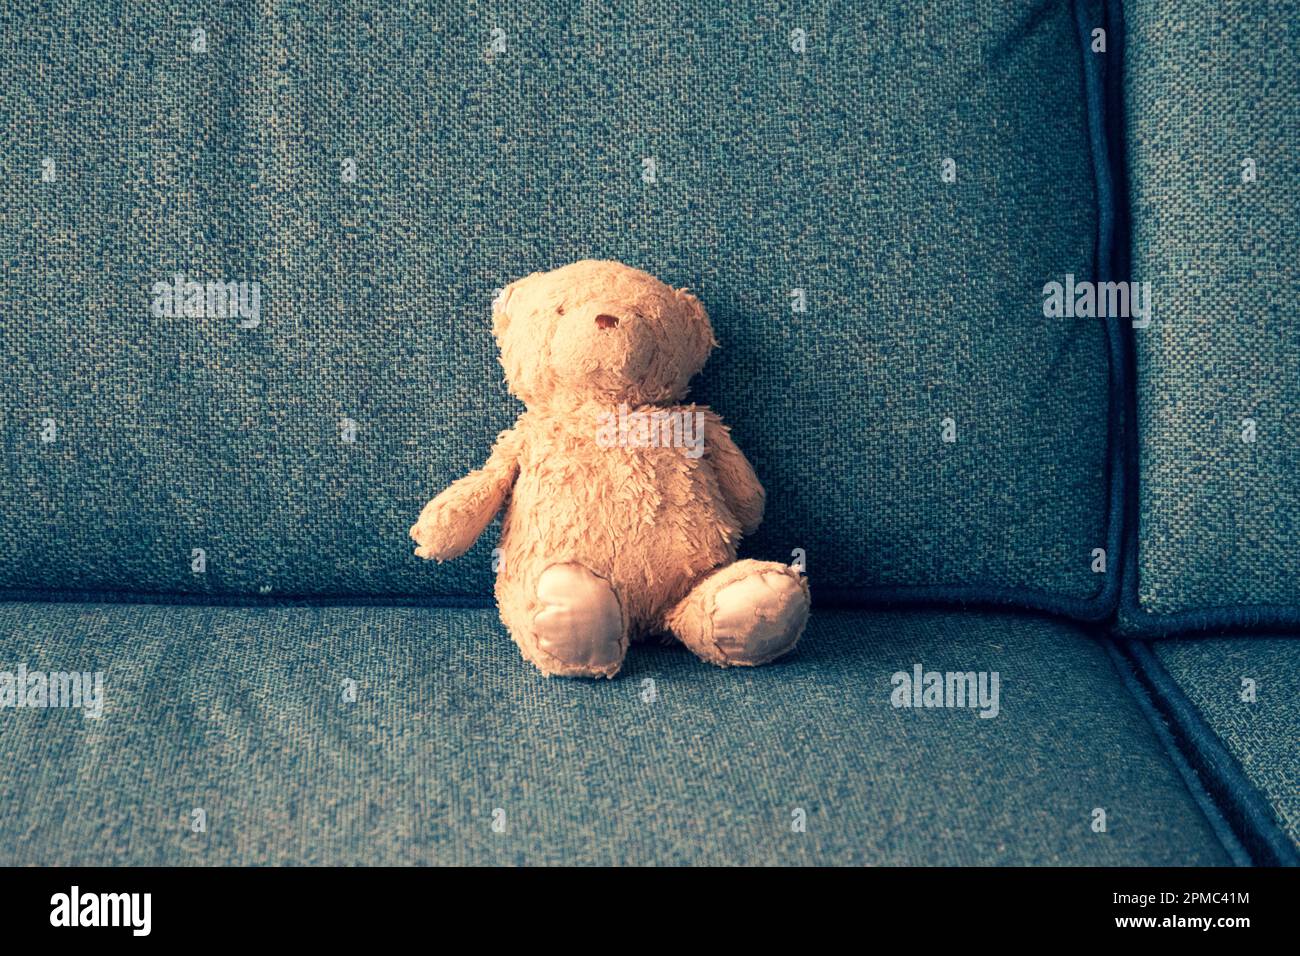 fuzzy well-loved teddy bears siting on a textured couch. Stock Photo